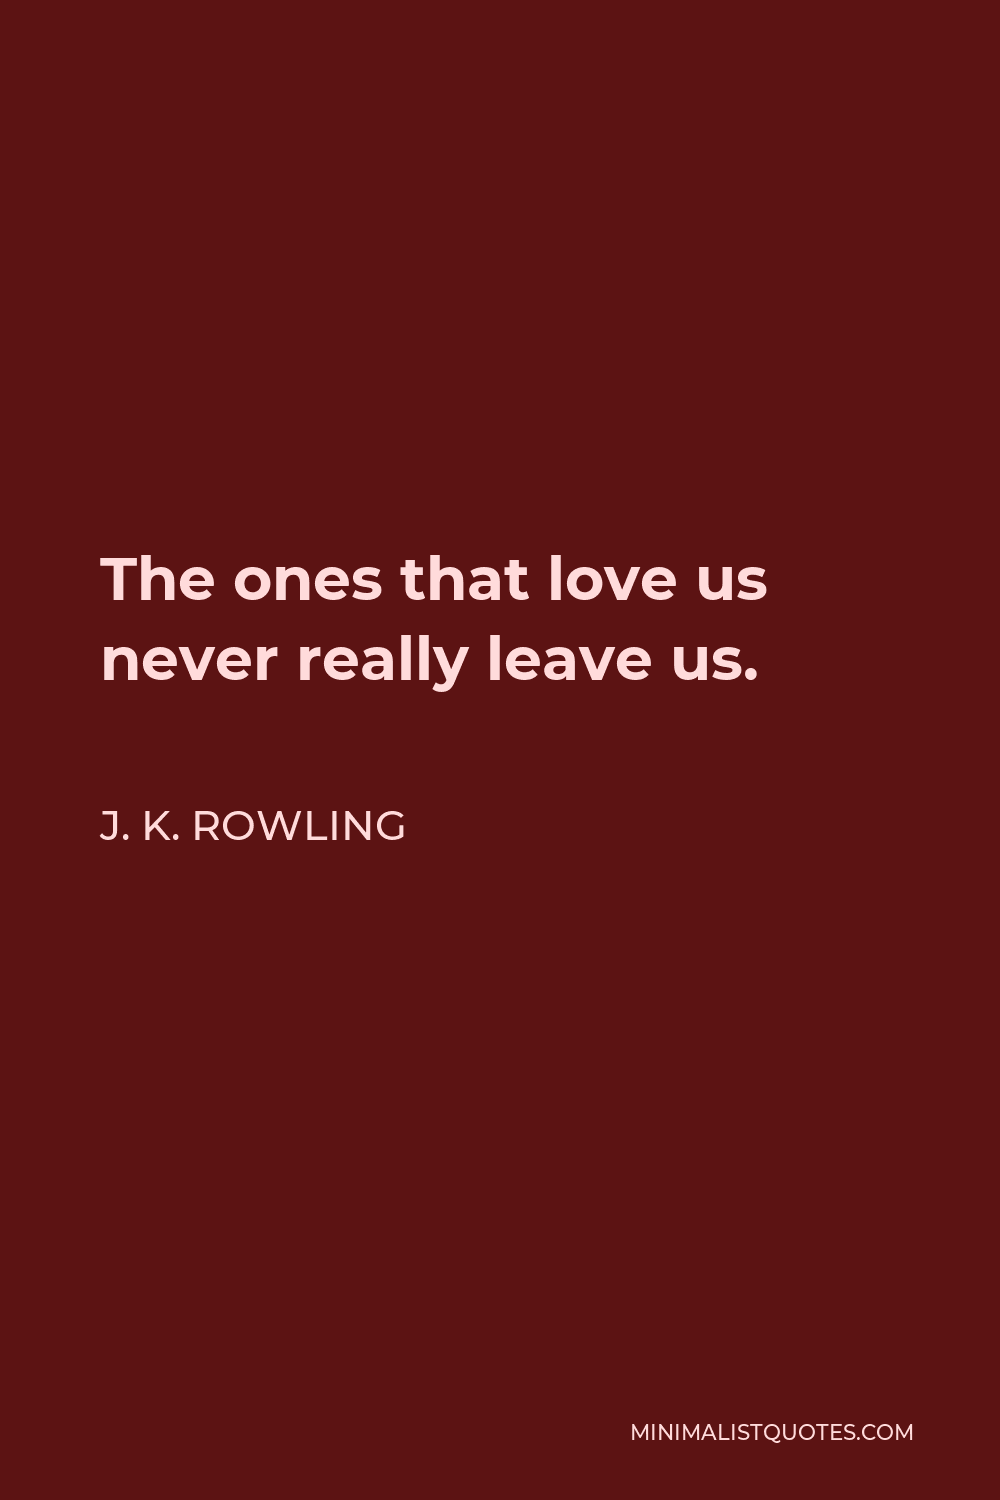 J. K. Rowling Quote - The ones that love us never really leave us.